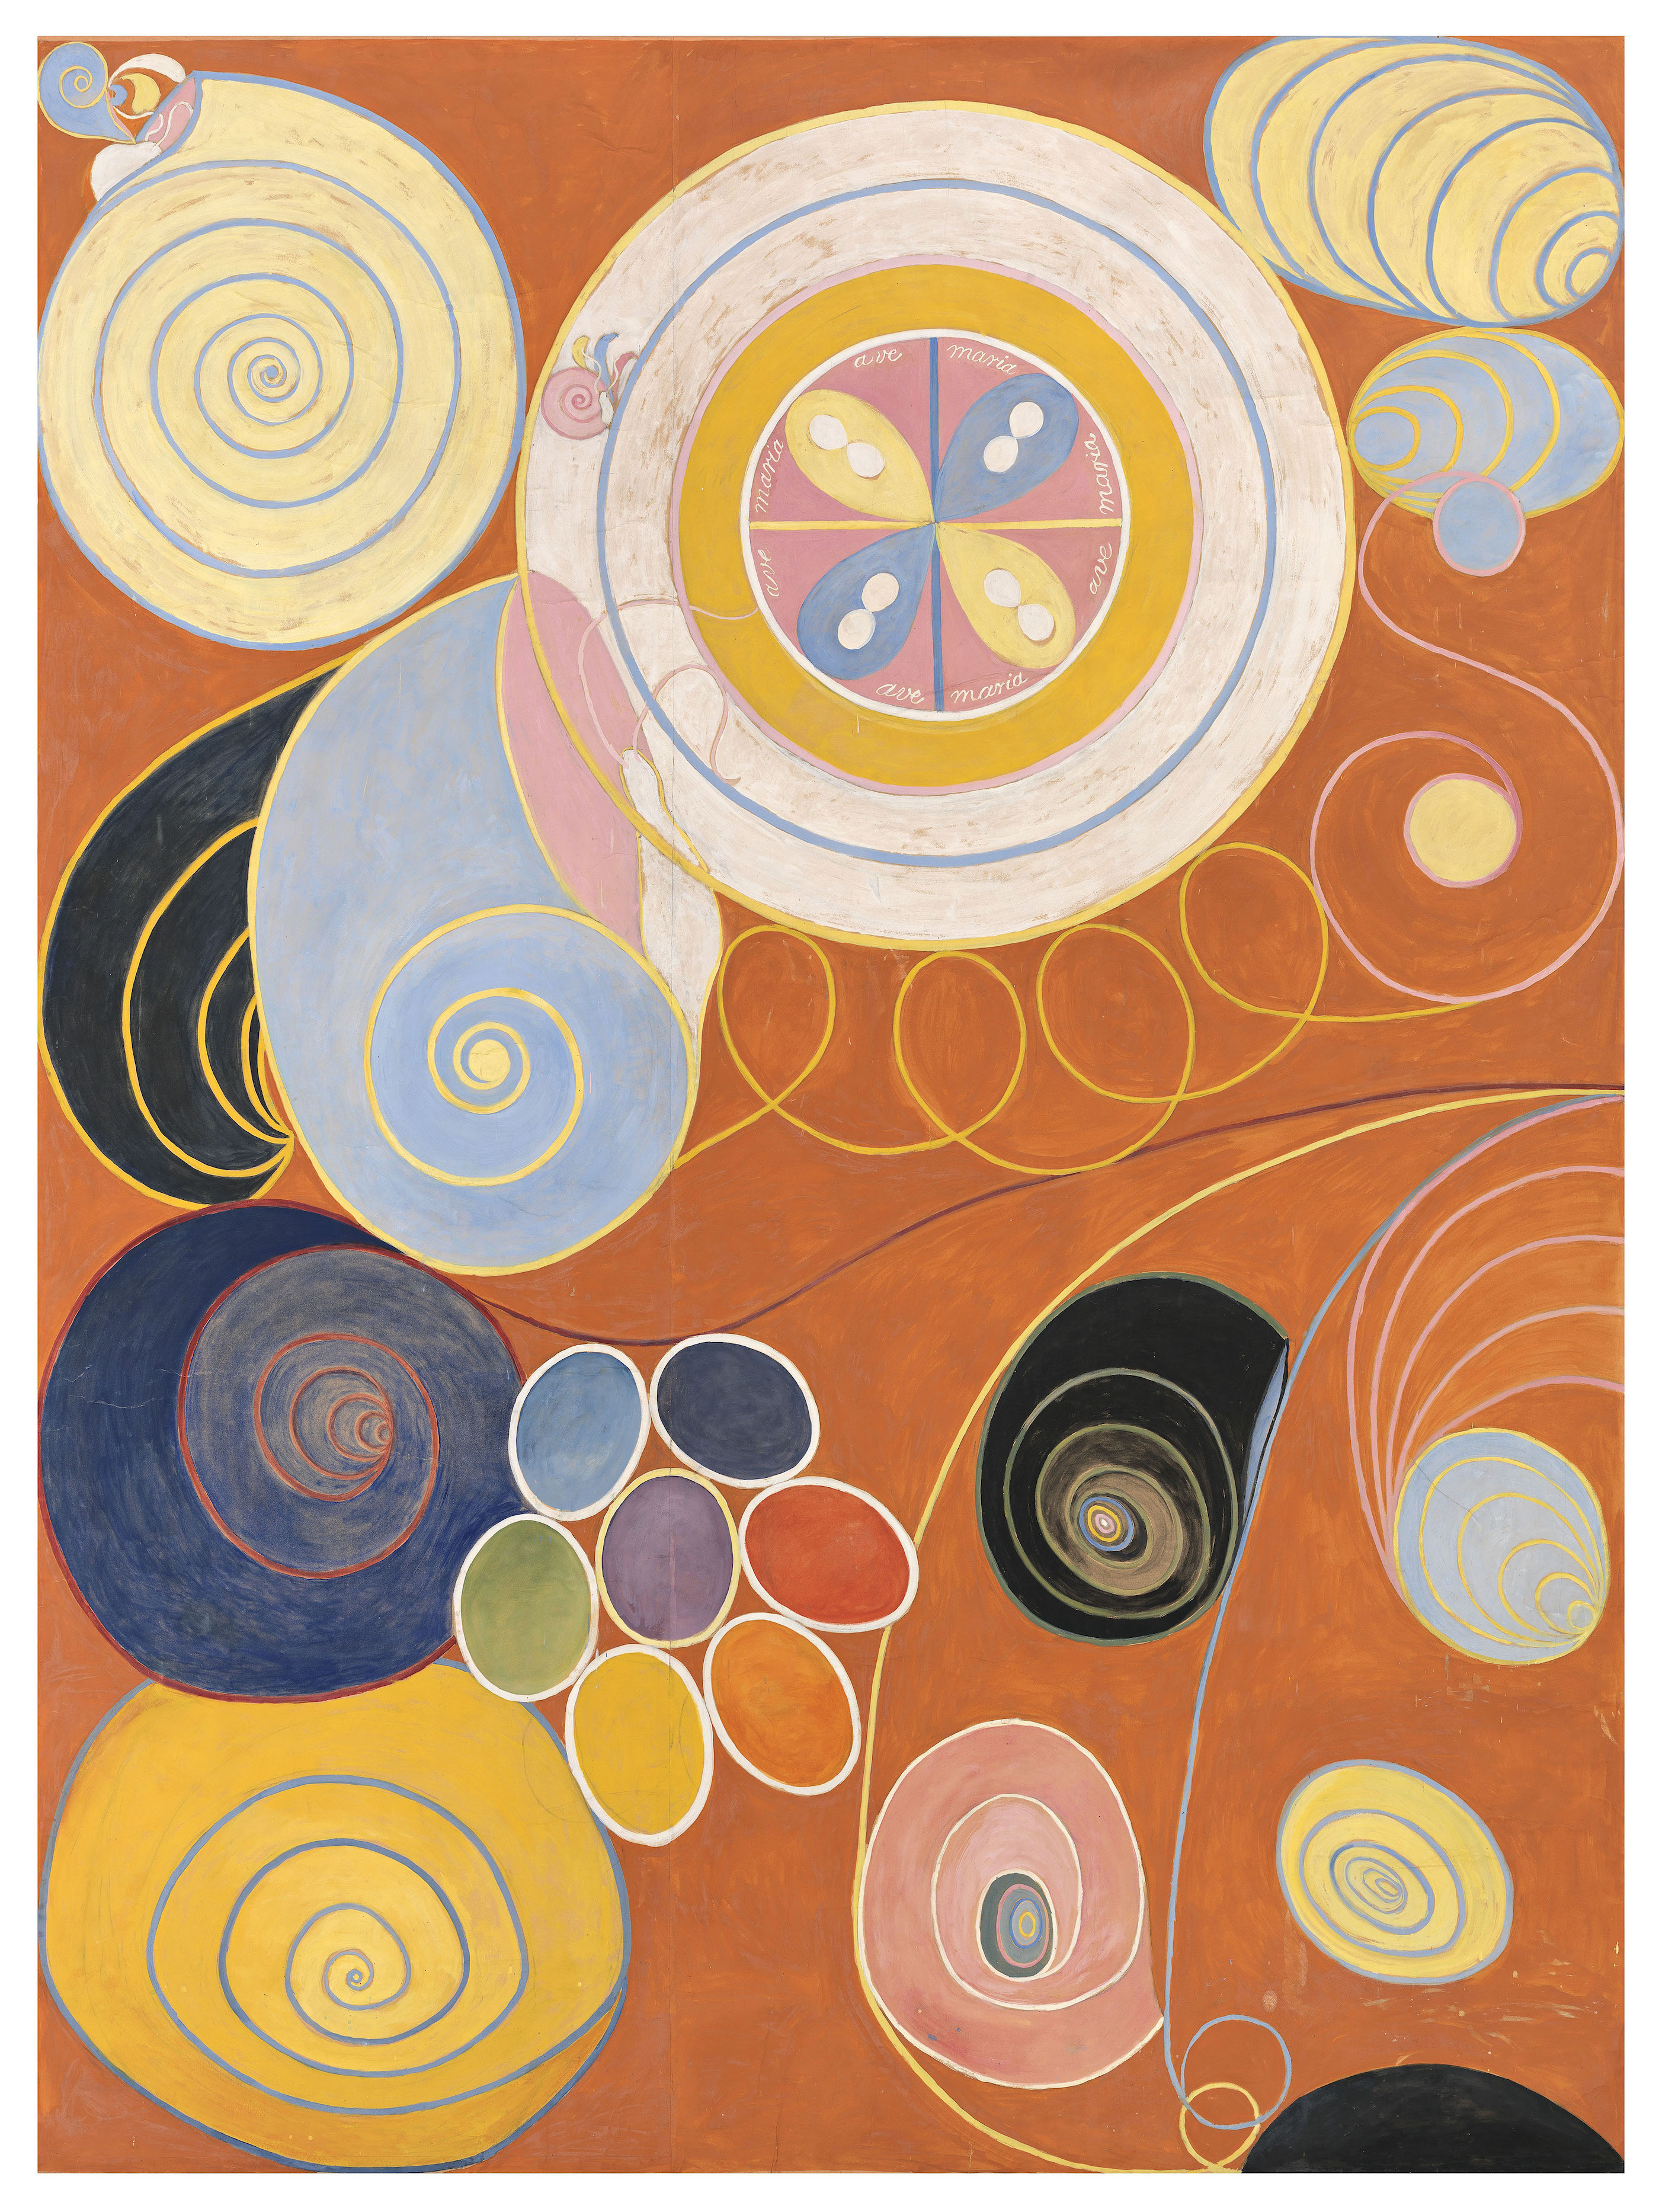 The Ten Largest, No. 3, Youth, Group IV by Hilma af Klint - 1907 